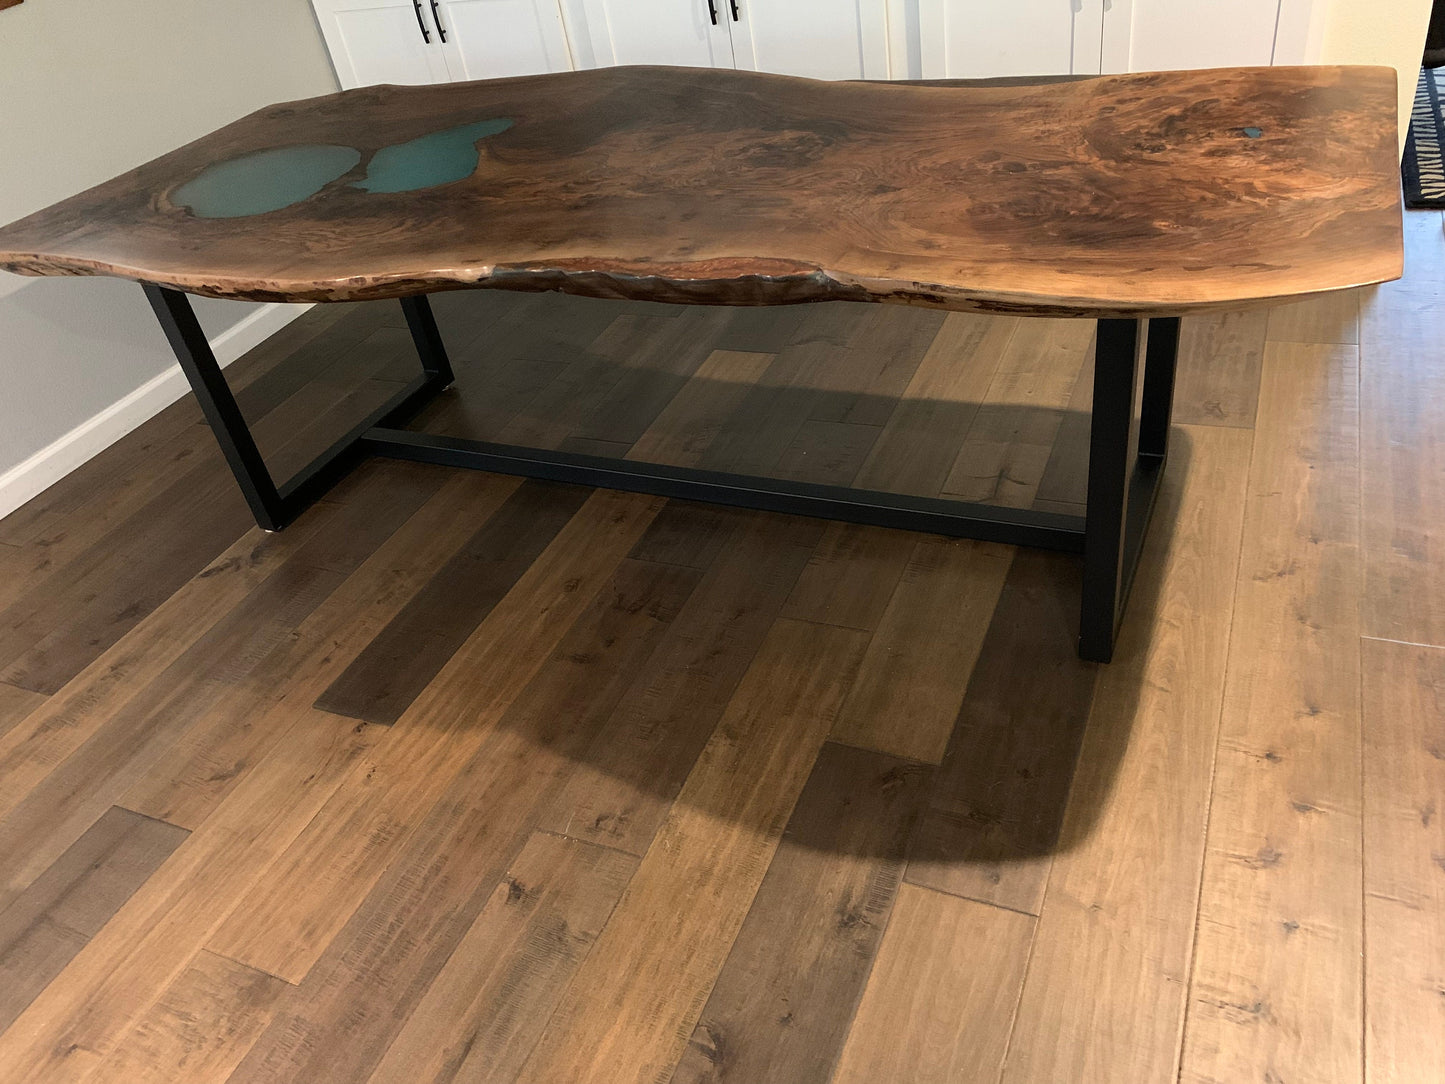 Large Live Edge Dining Table, 96 inch long, 8-10 seats, black walnut slab, 3 inch thick